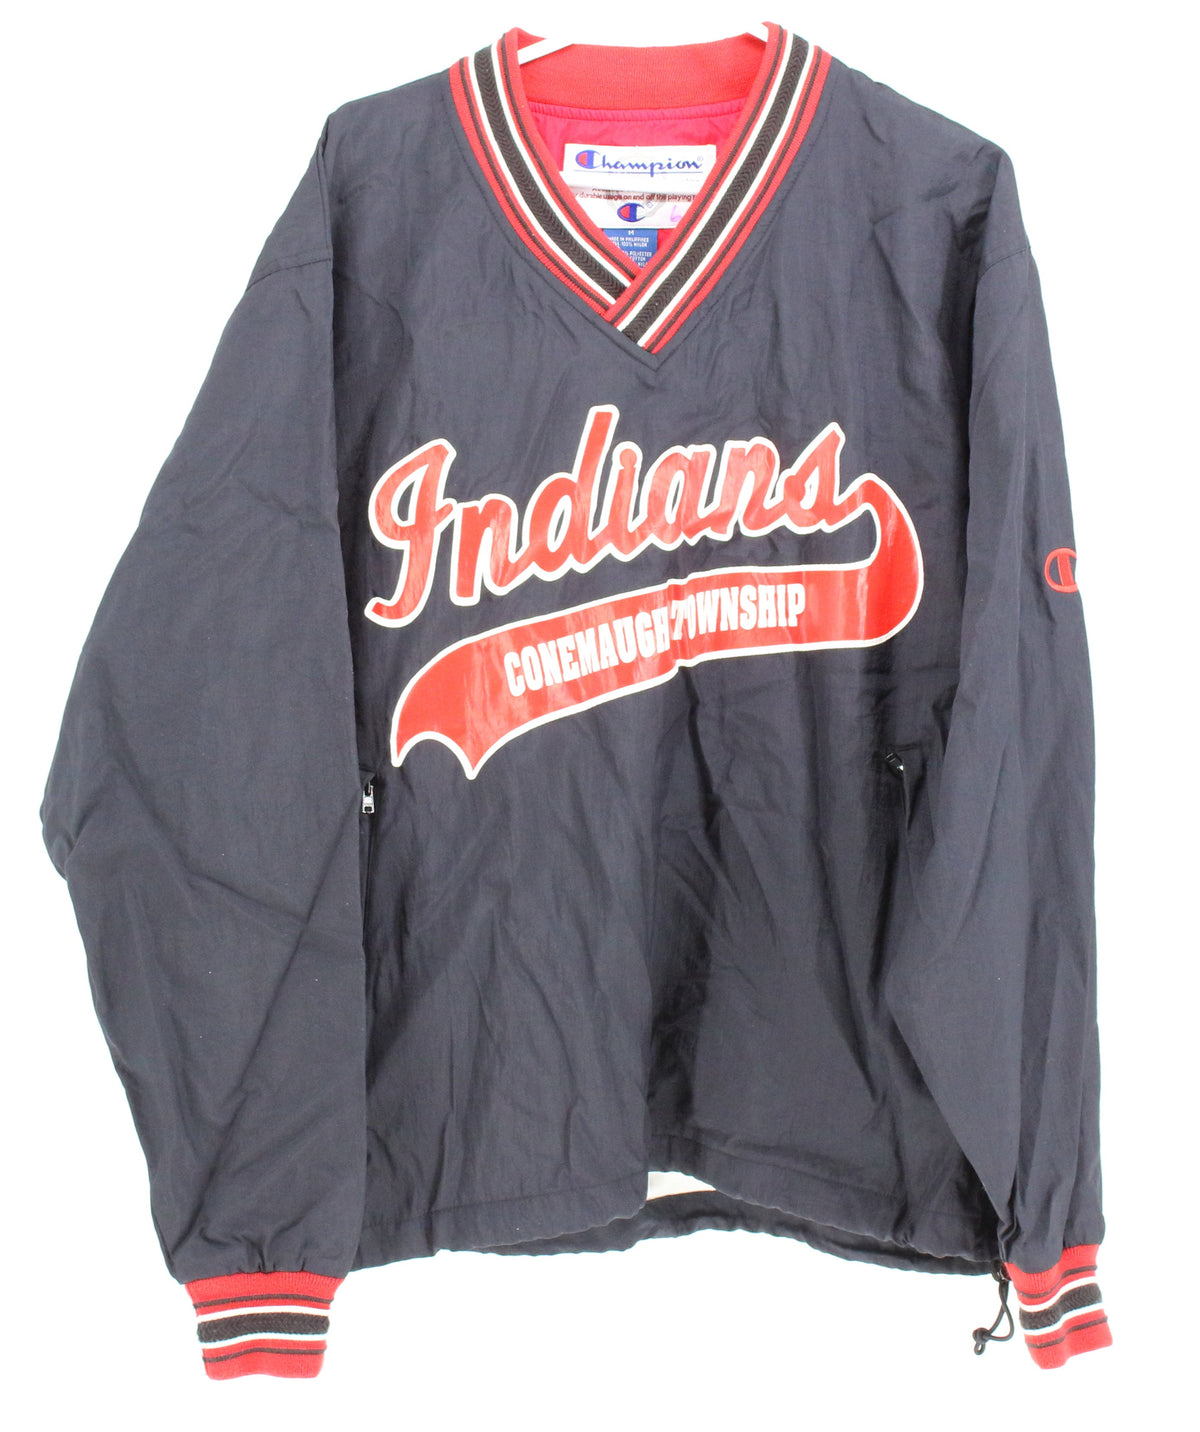 Champion Navy Blue and Red Indians Conemaugh Township Jacket